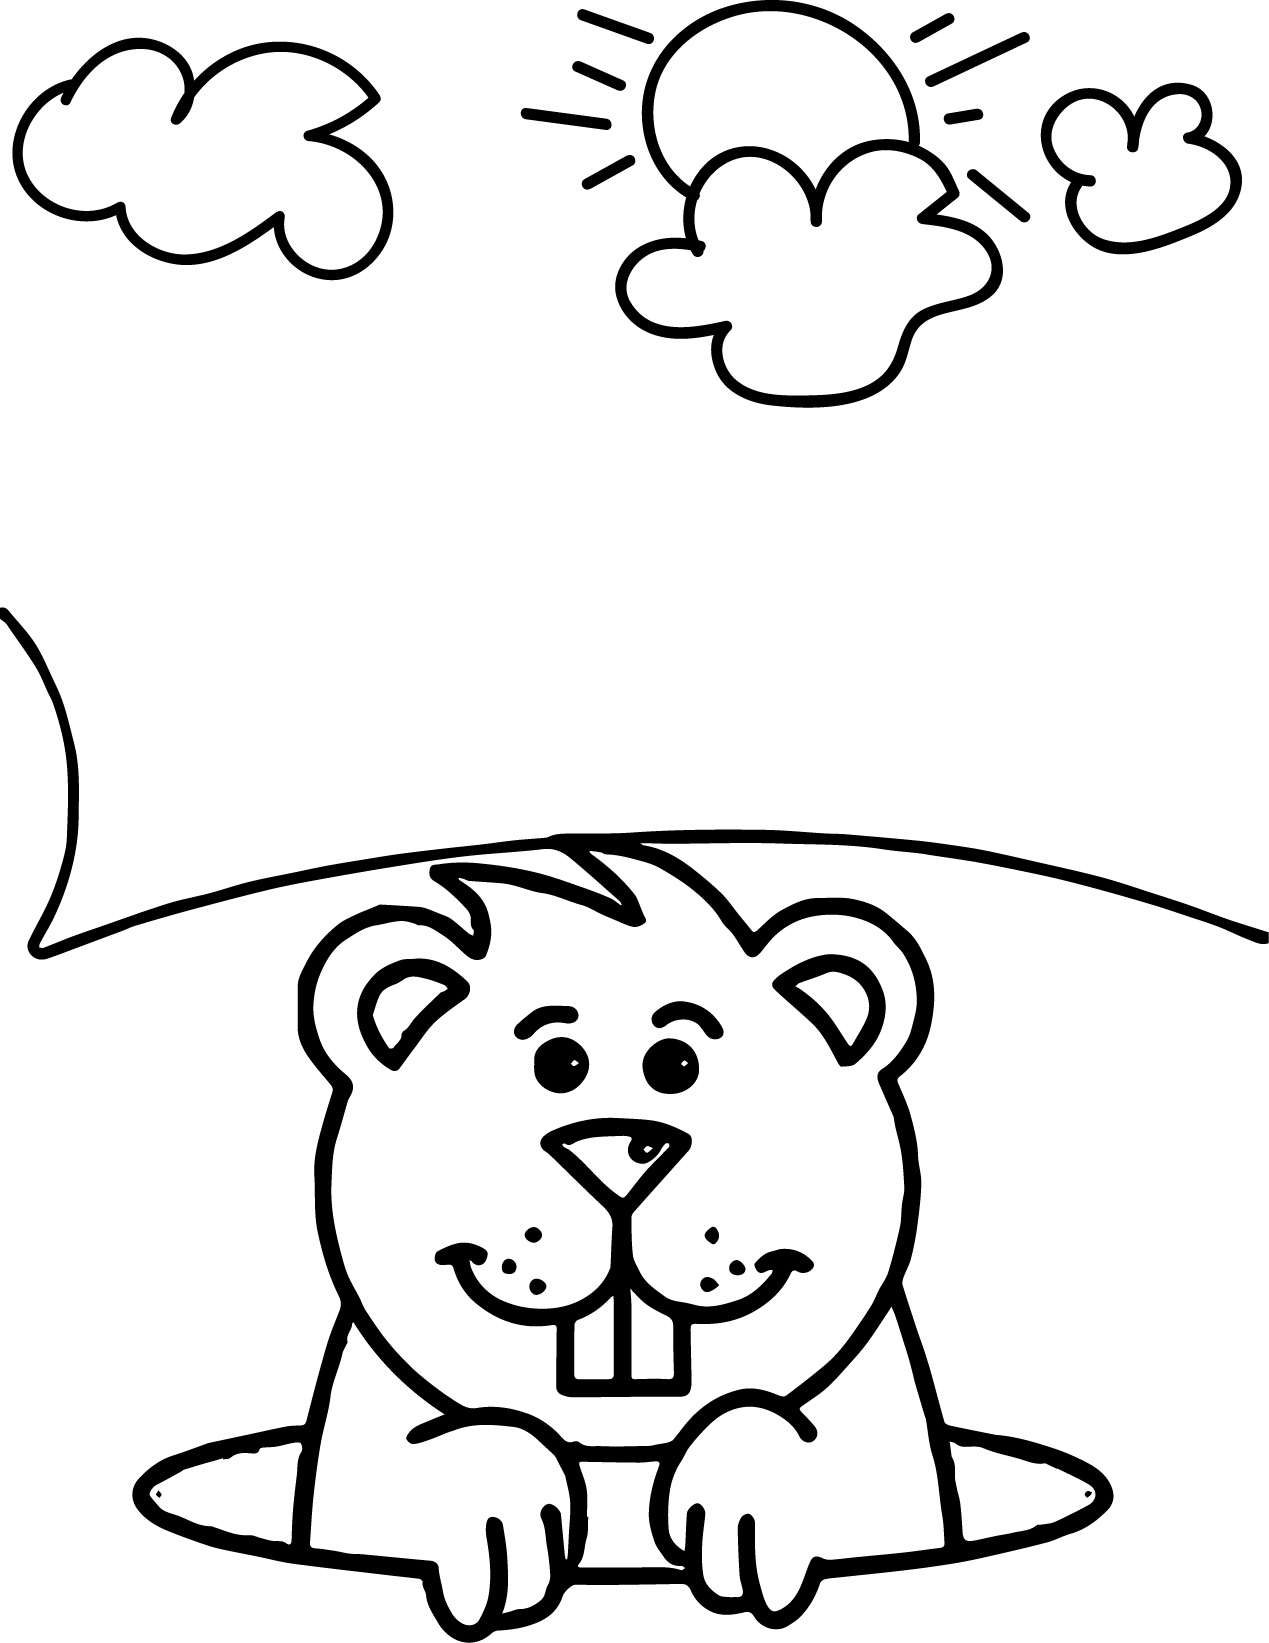 Groundhog coloring pages